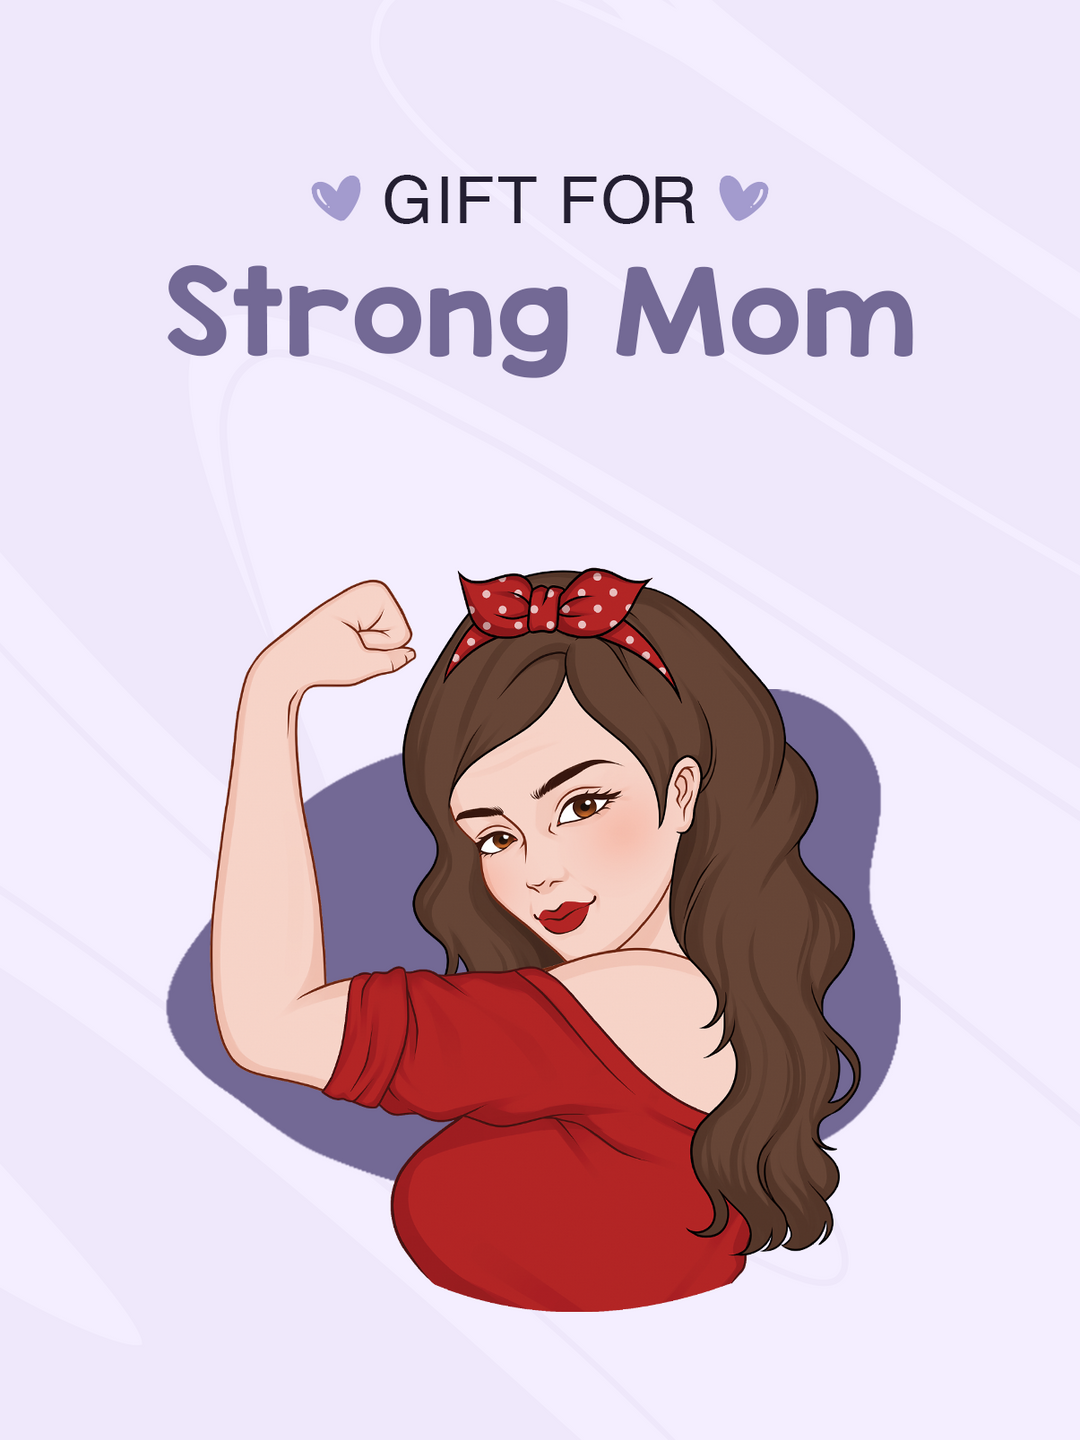 personal house gift for strong mom_9115f44f 6a1e 416d aaaf bbea195442cd